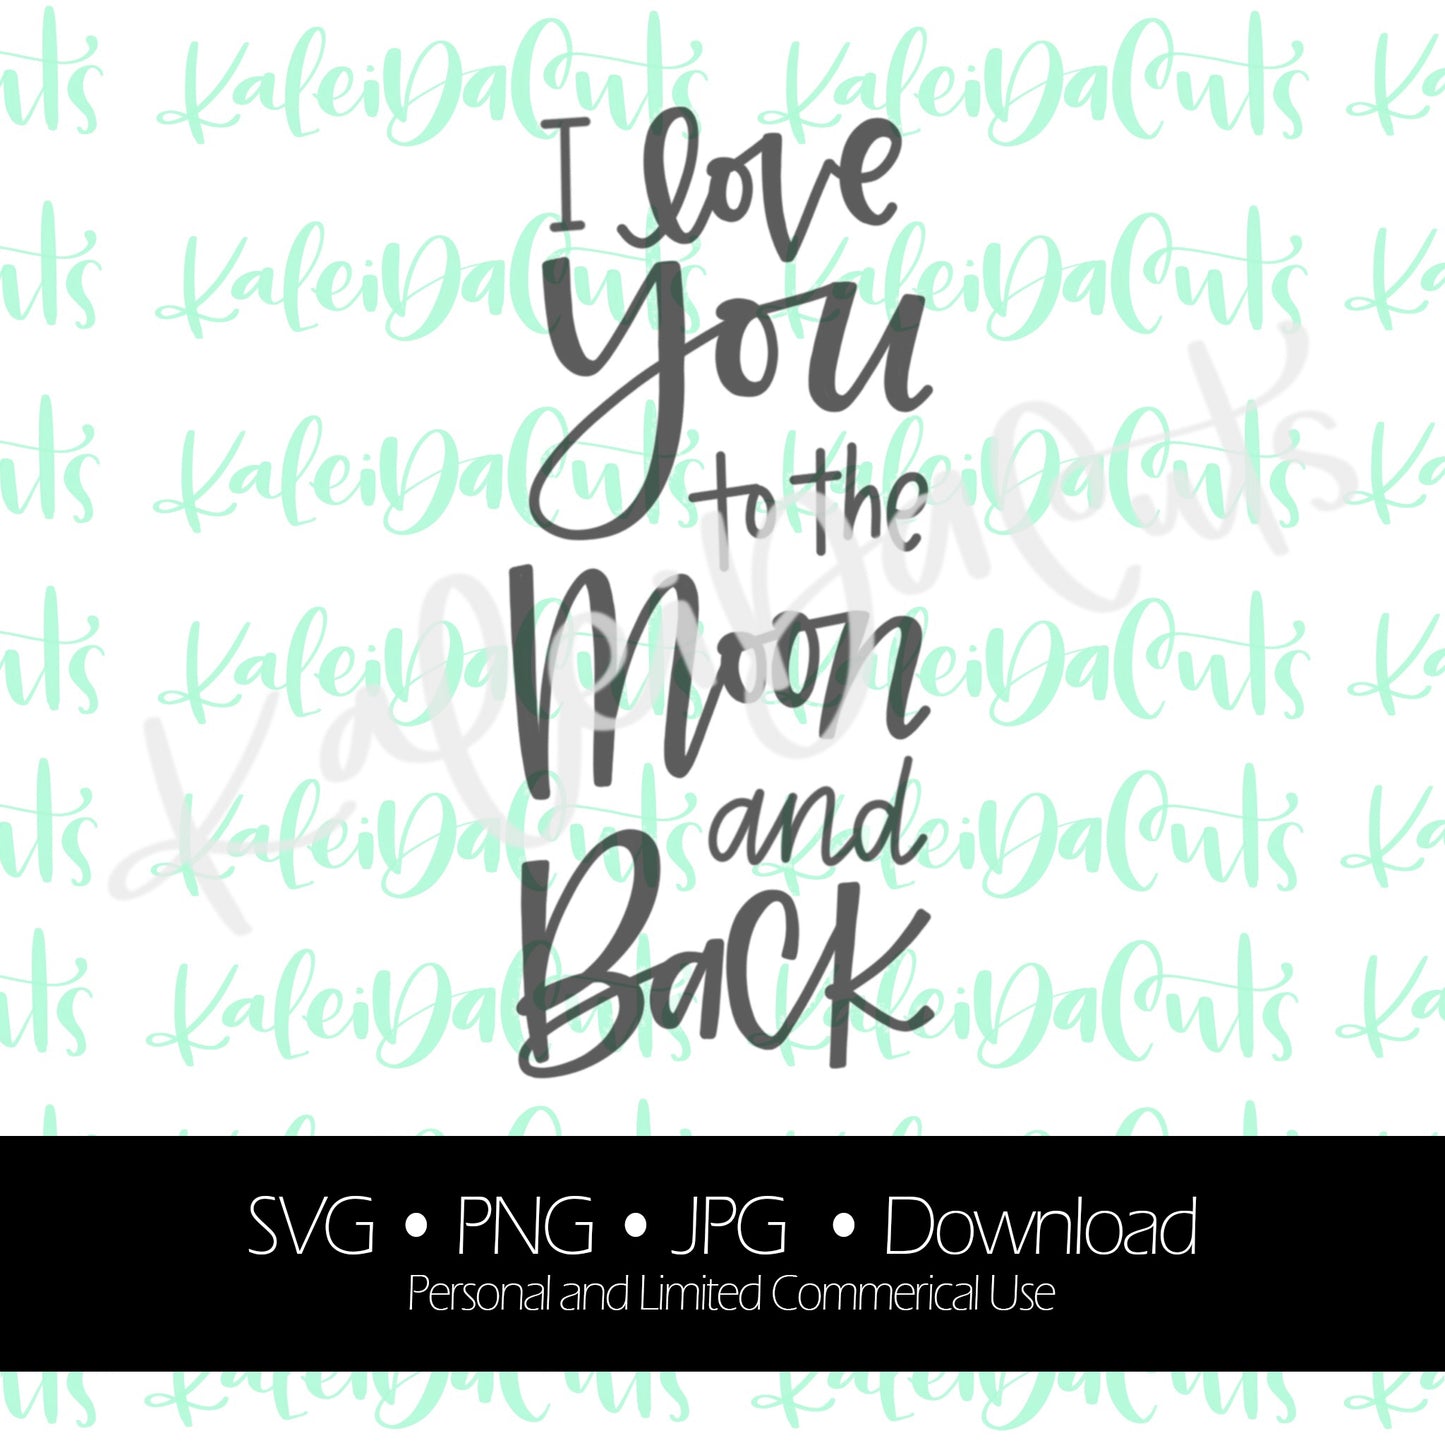 I Love You to the Moon and Back 2 Digital Download.